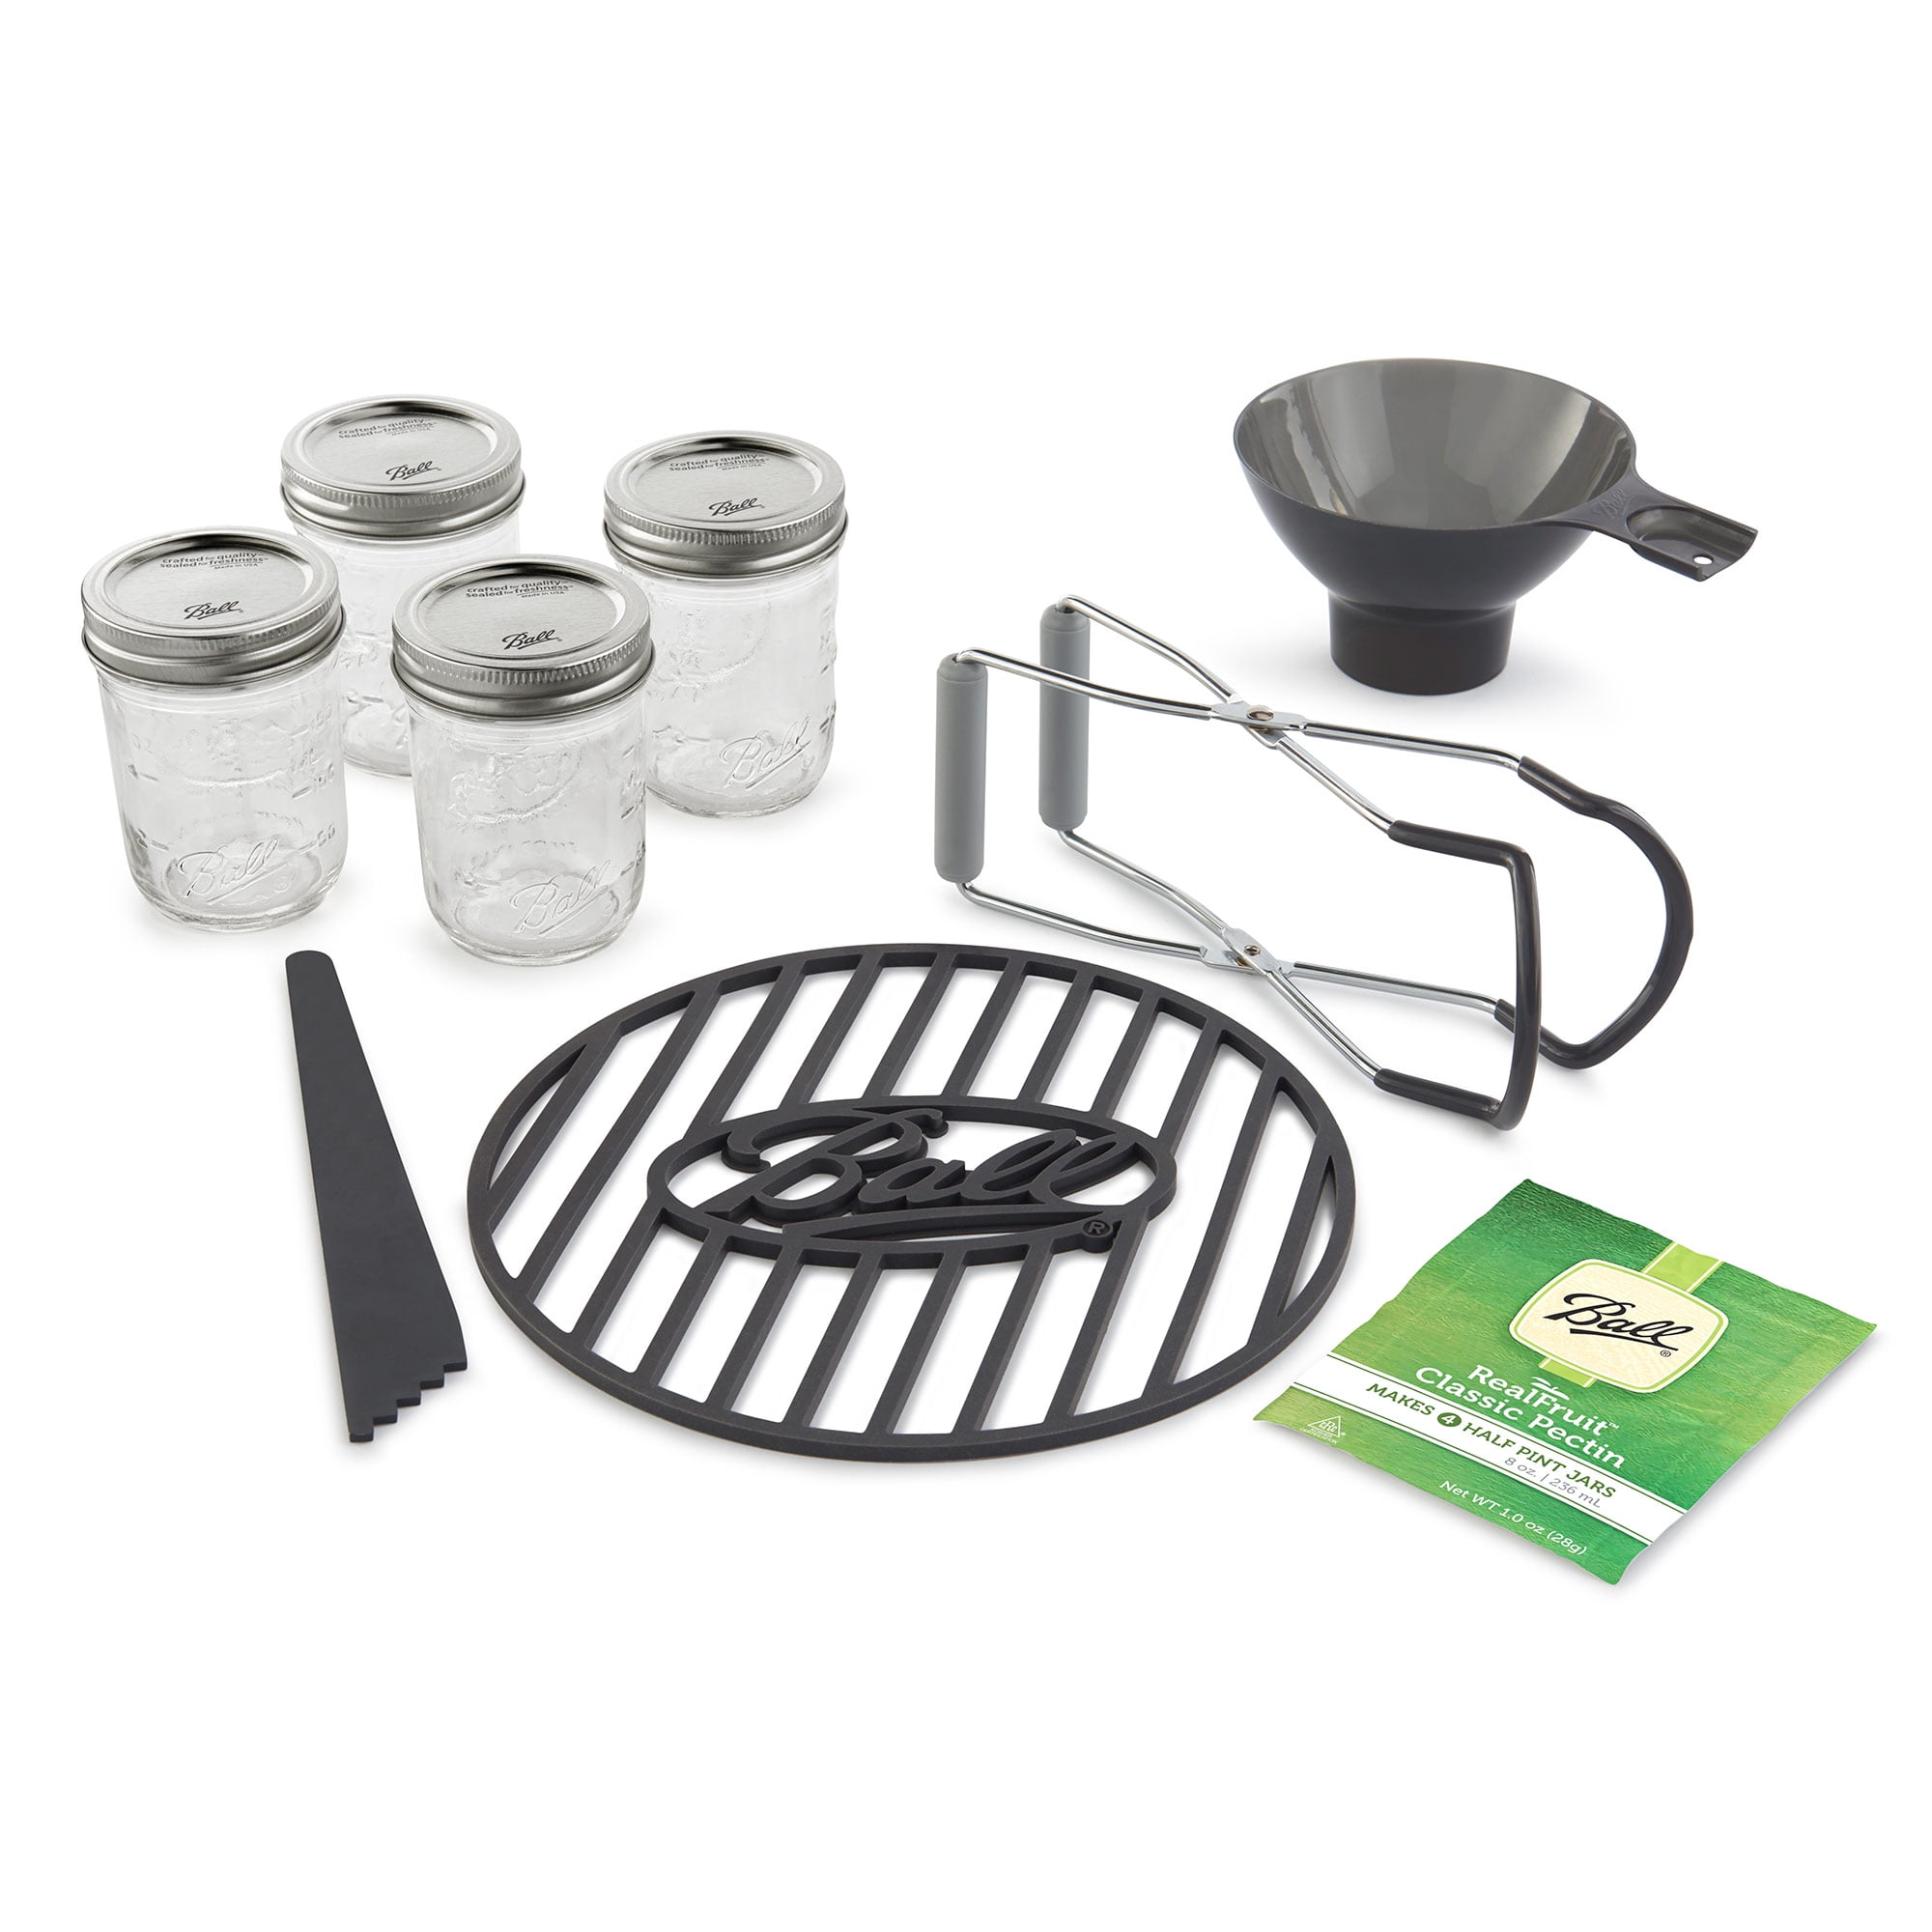 HOMKULA 9-Piece Canning Supplies, Includes 20 Quart Canning